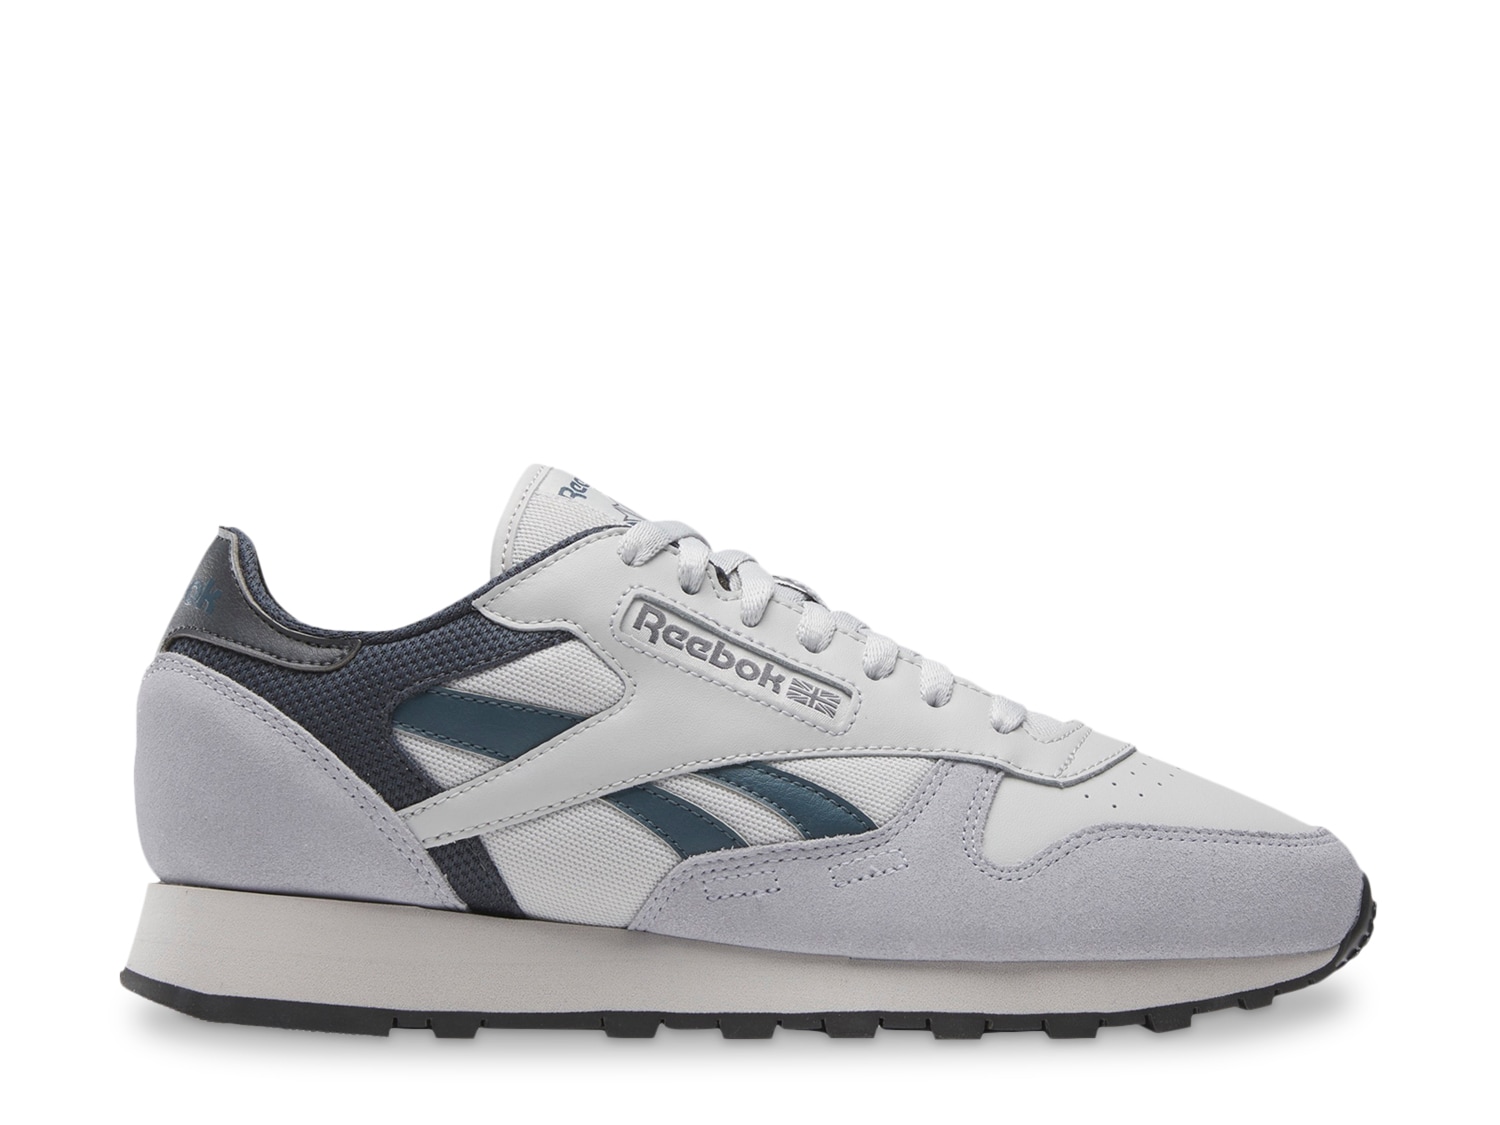 Reebok Classic Leather Cold Grey 2 (Women's)